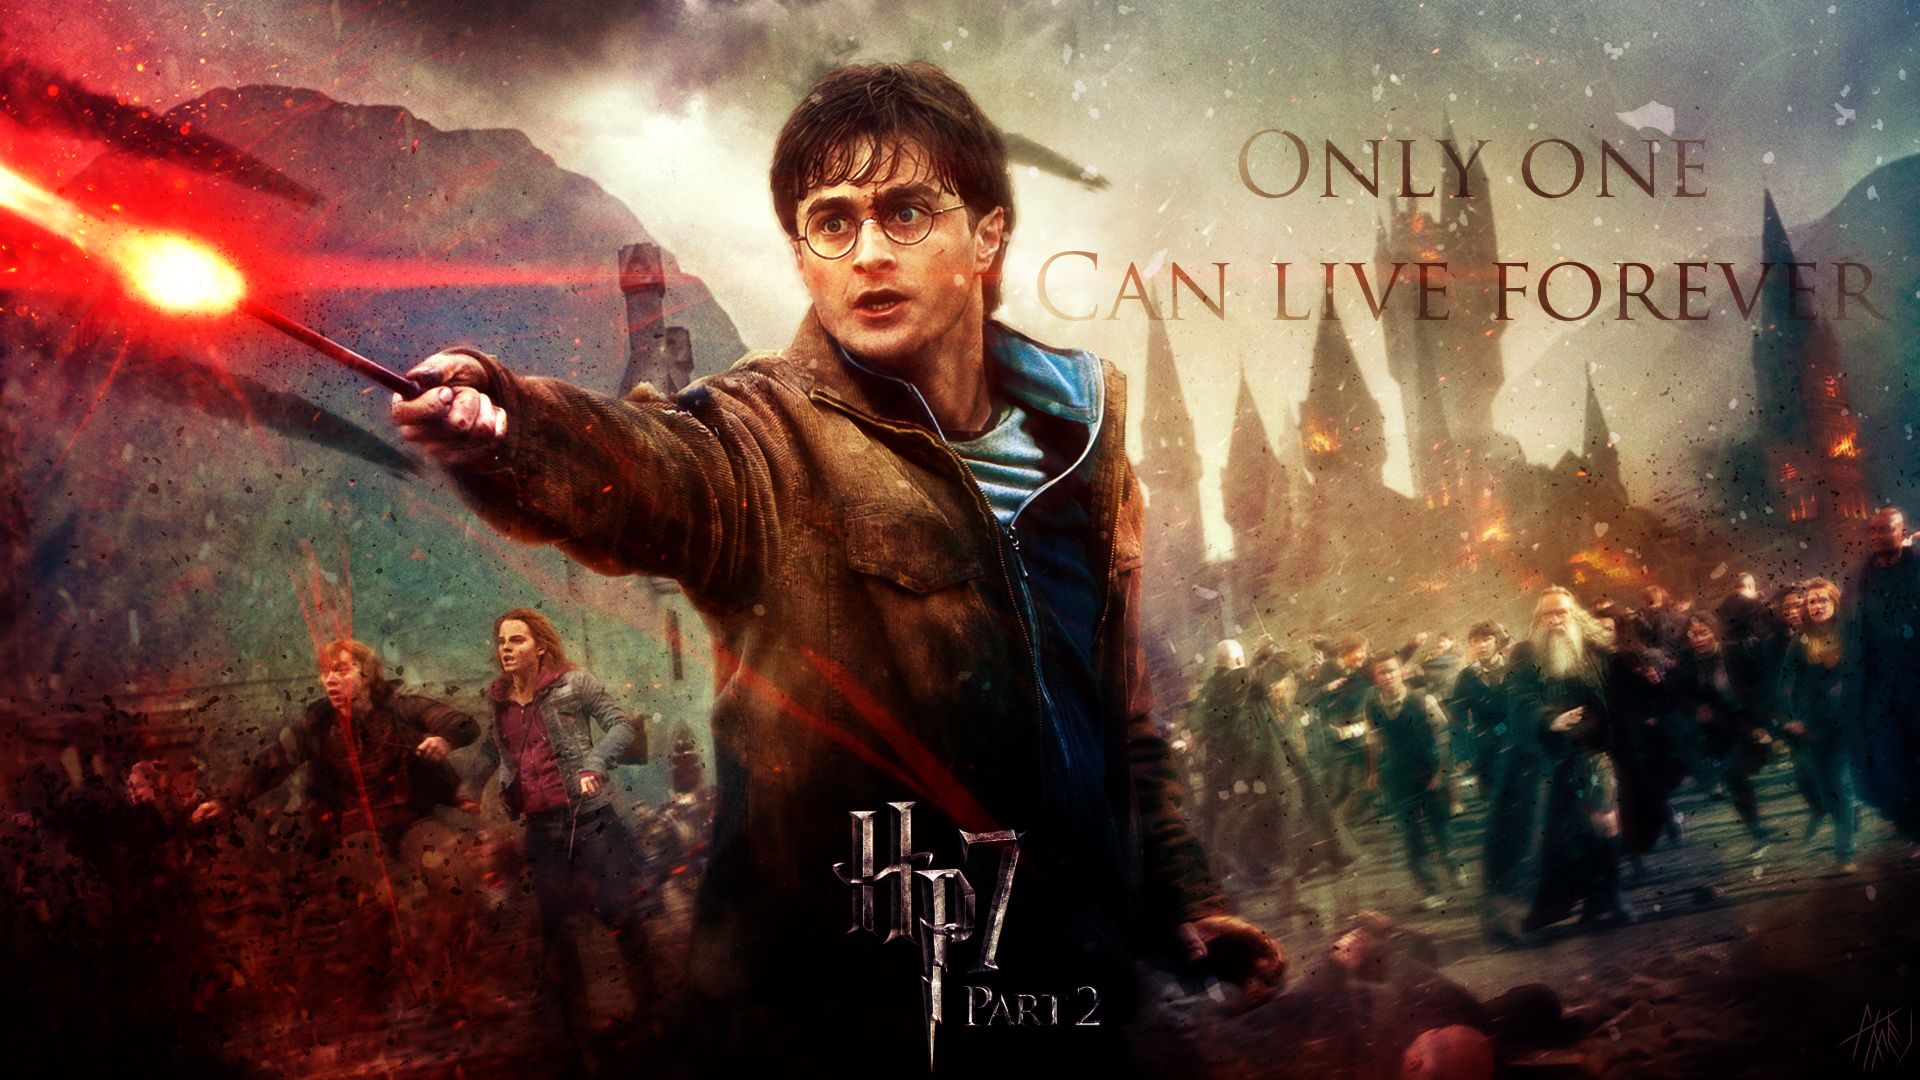 Harry Potter and The Deathly Hallows Wallpaper by DJ AppleJ Sound